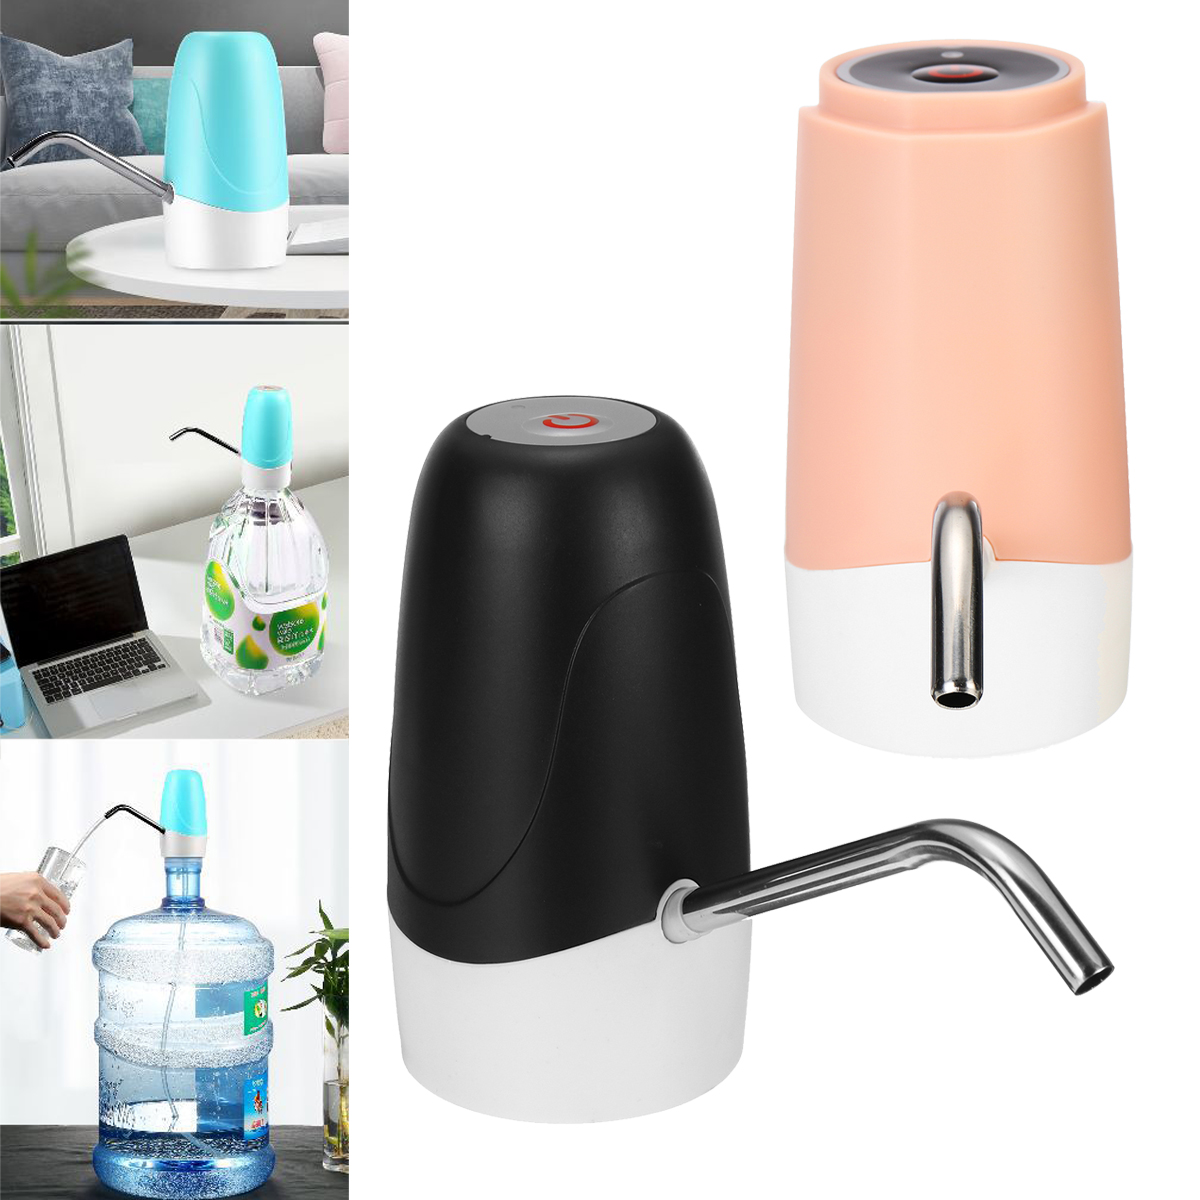 Automatic-Electric-Water-Pump-Dispenser-USB-Charging-Drinking-Bottle-Switch-Pump-1684971-8